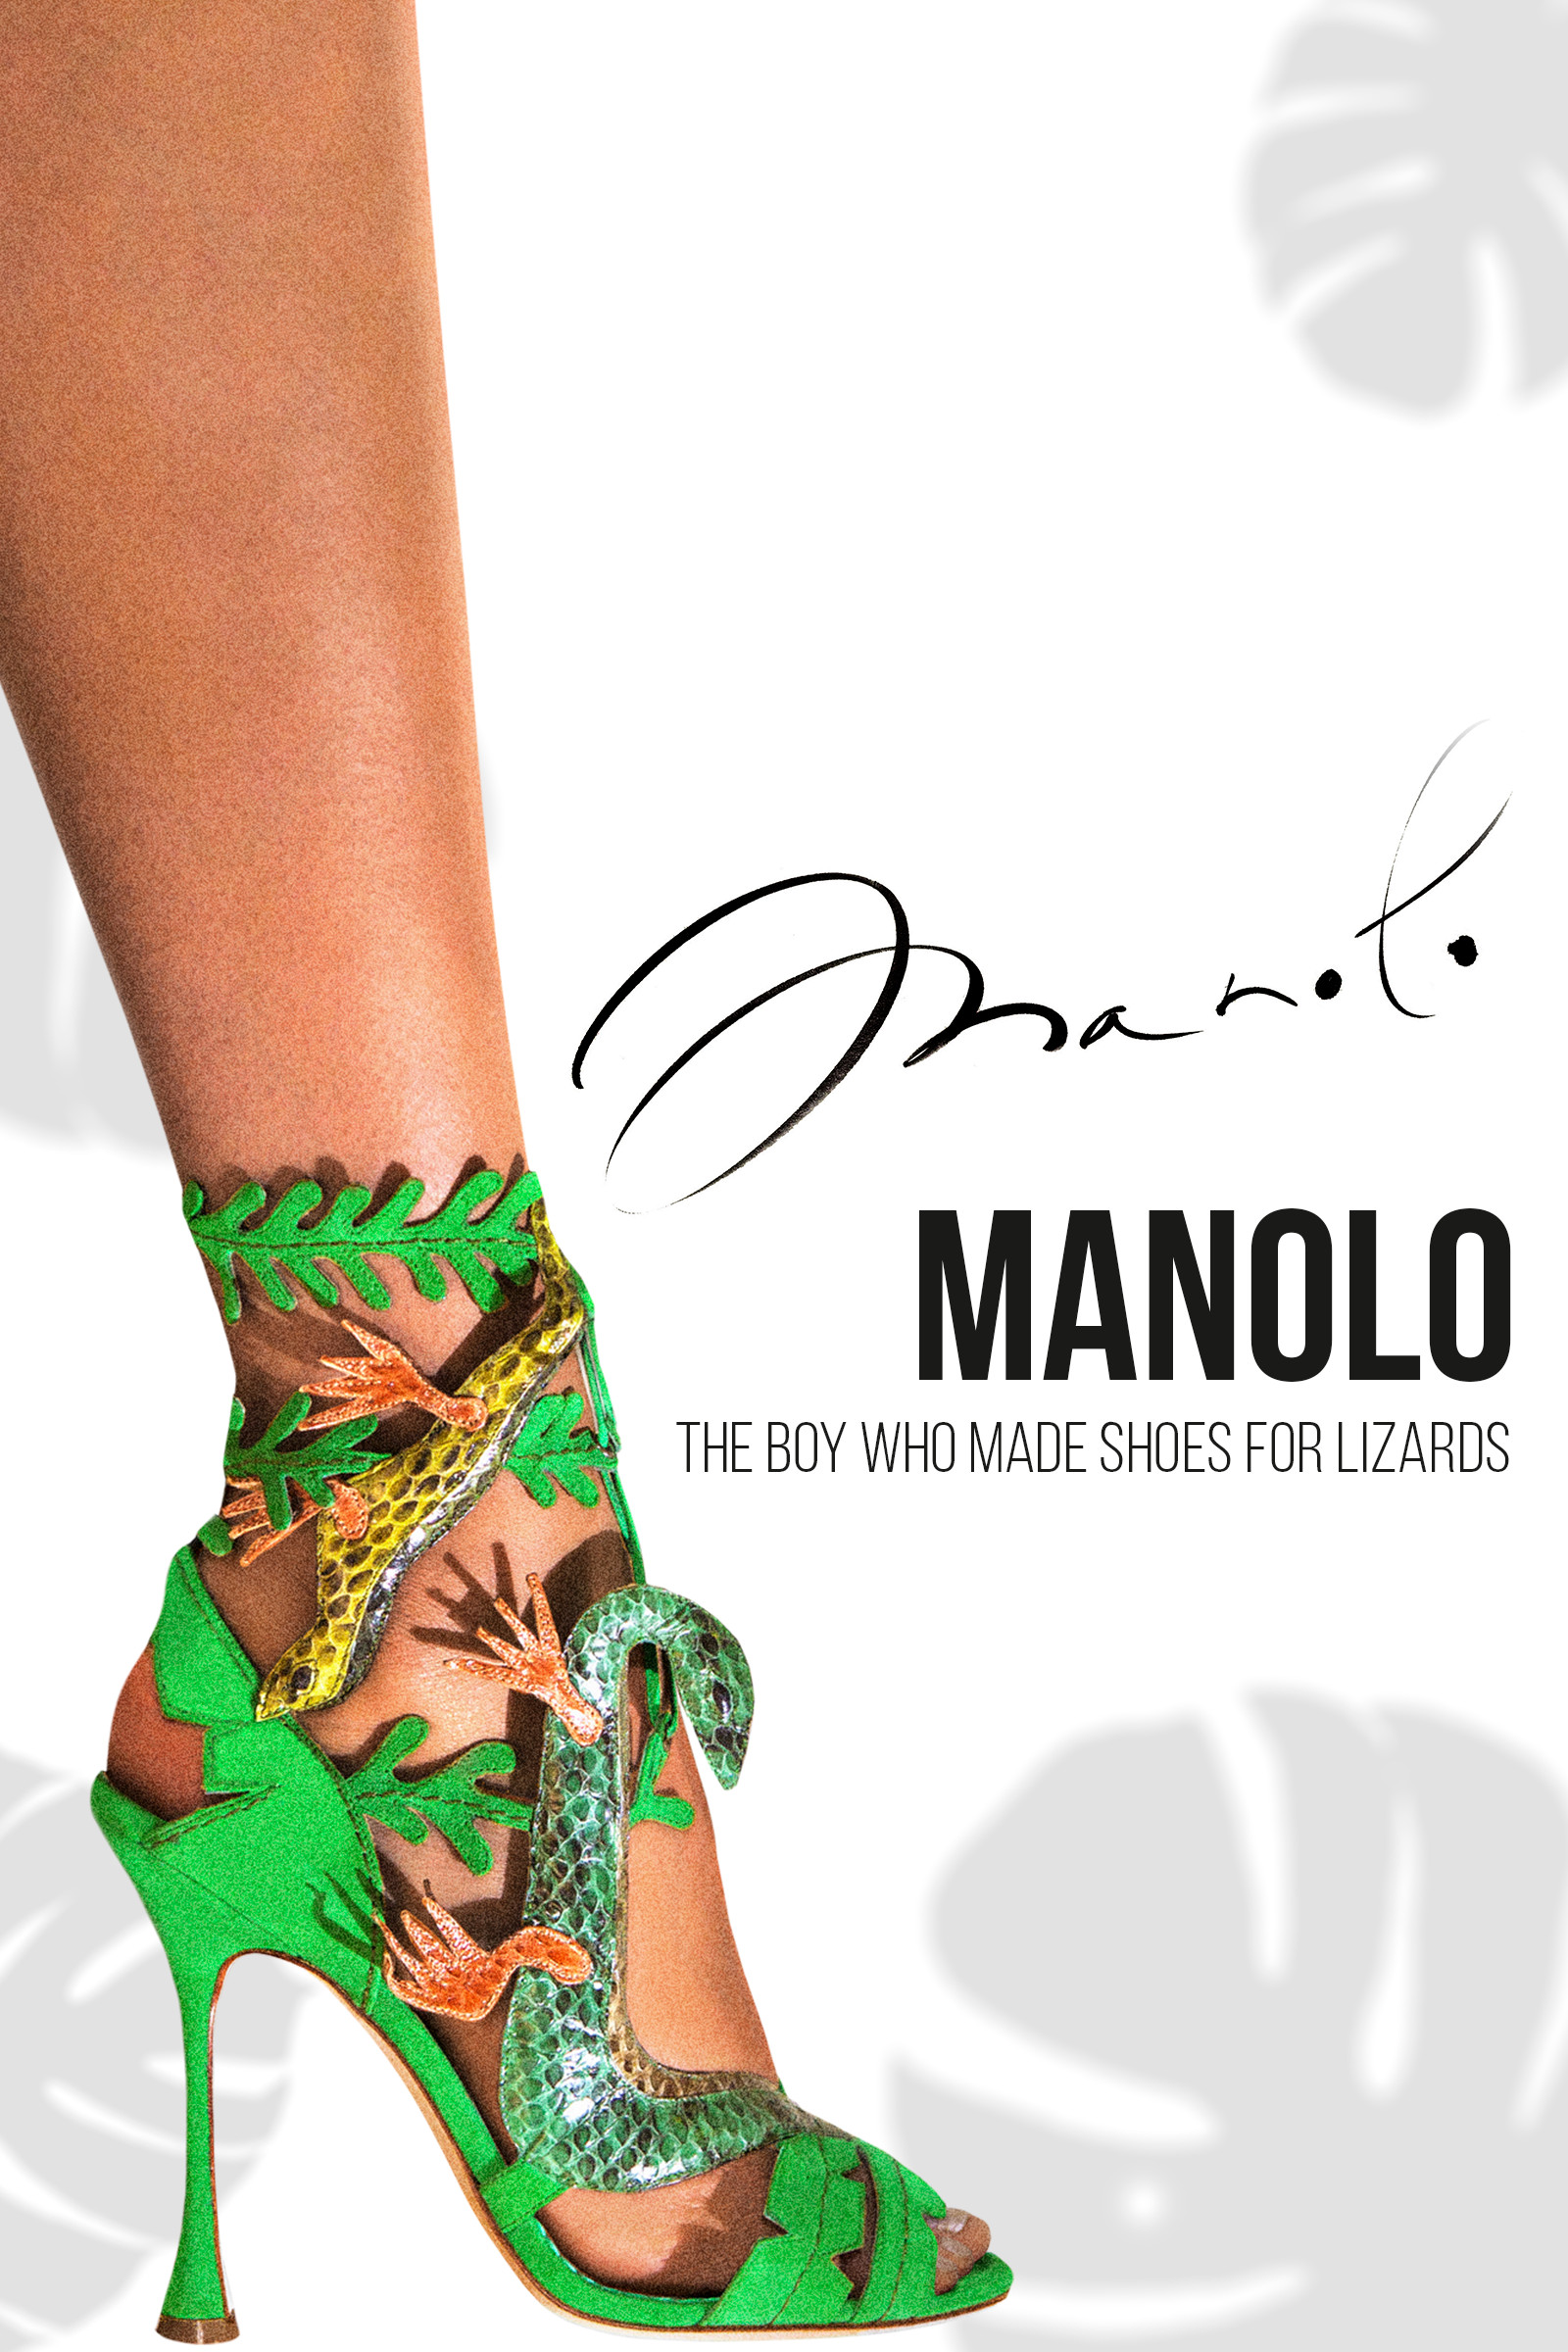 Where to stream Manolo - The Boy Who Made Shoes For Lizards